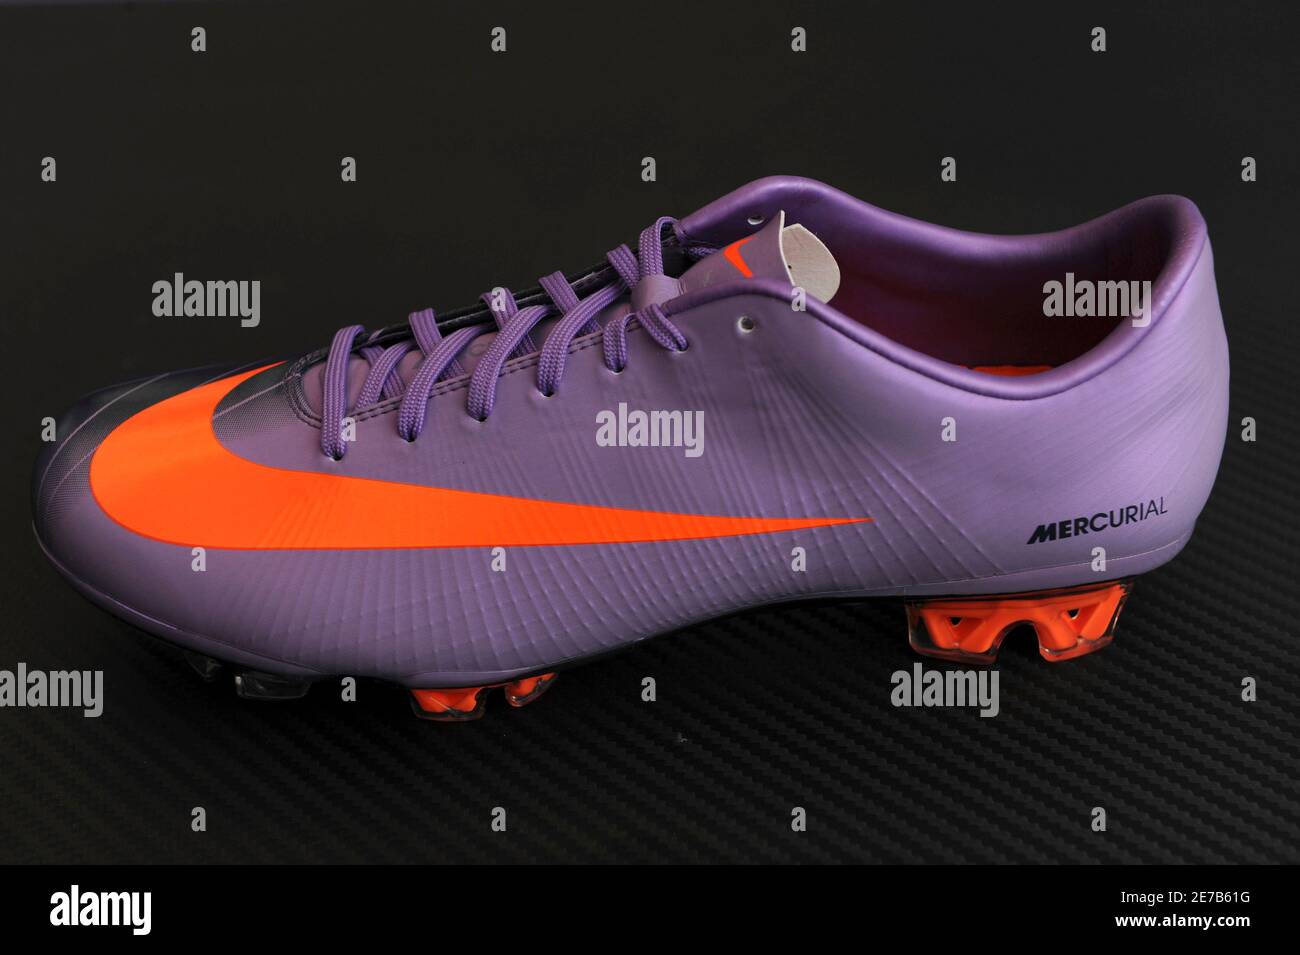 The new Nike Mercurial Vapor SuperFly II soccer boot is displayed during  its launch at an event in London February 24, 2010. REUTERS/Jas Lehal ( BRITAIN - Tags: BUSINESS SPORT SOCCER Stock Photo - Alamy